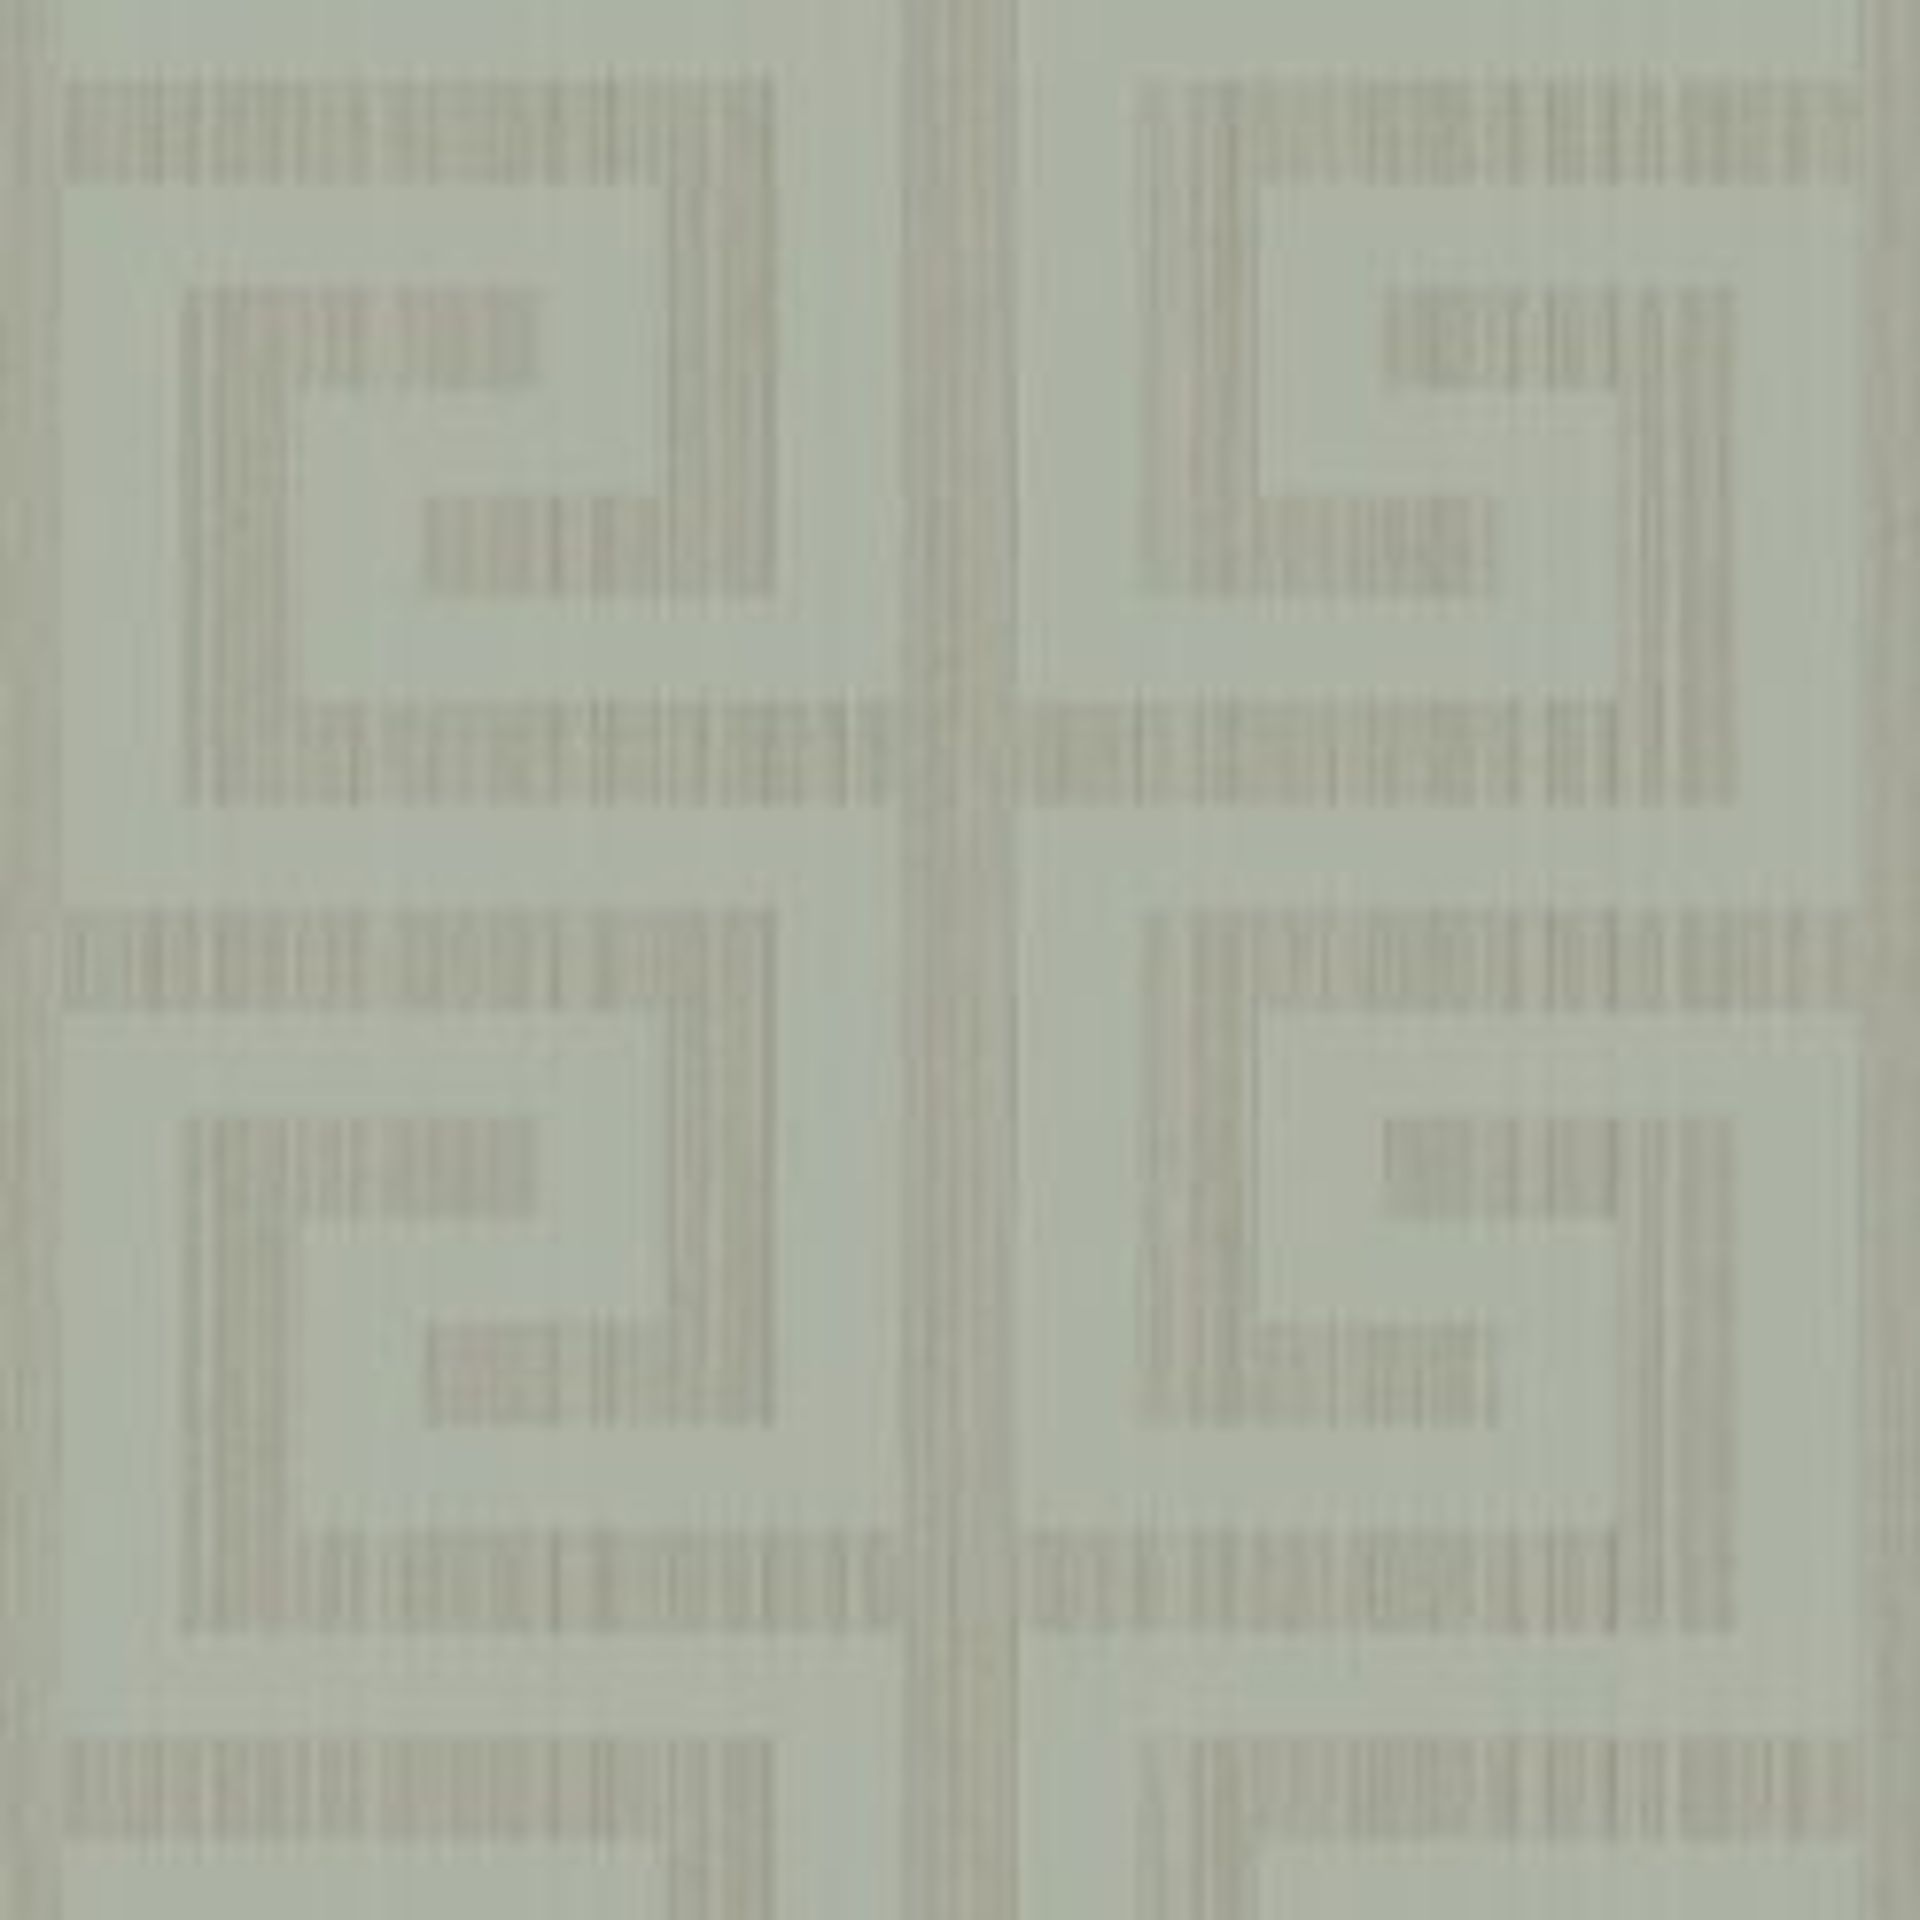 93 Rolls of Essential Textures Wallpaper (Bays 1001 – 1070) (Library Images – Some Colours May Not - Image 22 of 29